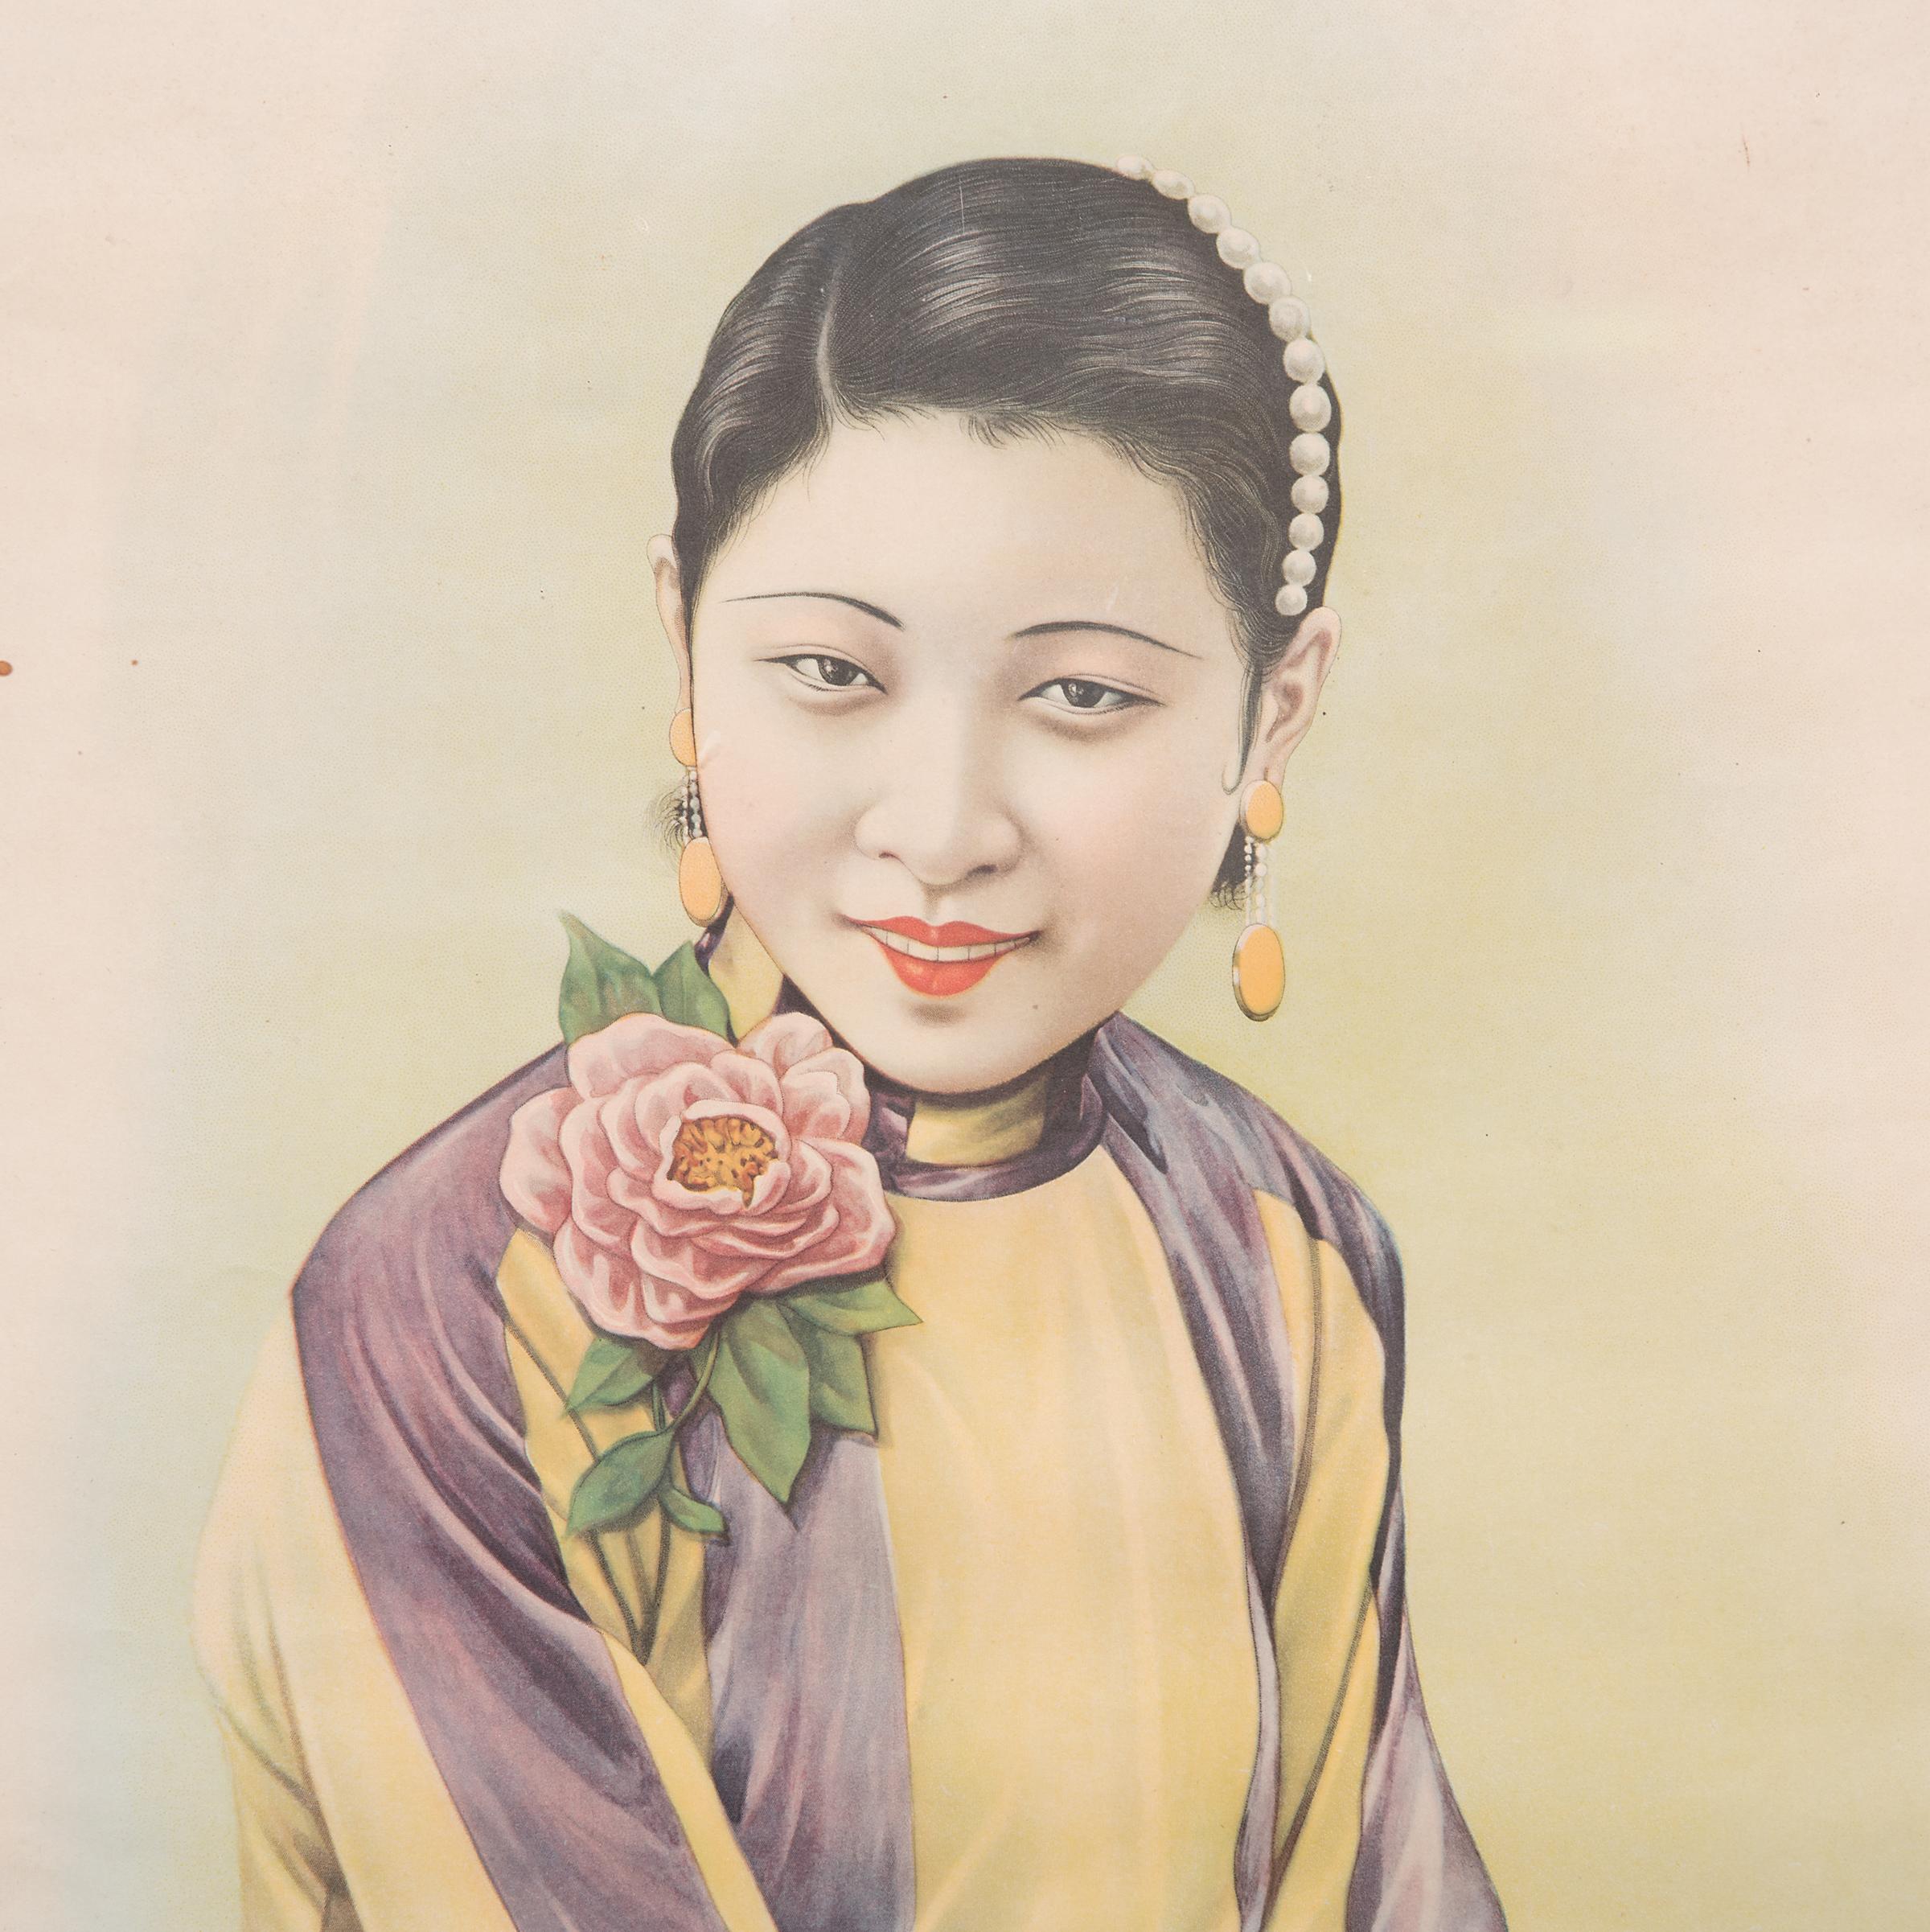 This framed advertising poster for Hatamen Cigarettes from the late 1920s melds the meticulous detail of traditional Chinese painting with the Craft of color lithography. These advertisements, depicting fashionable women and influenced by the Art